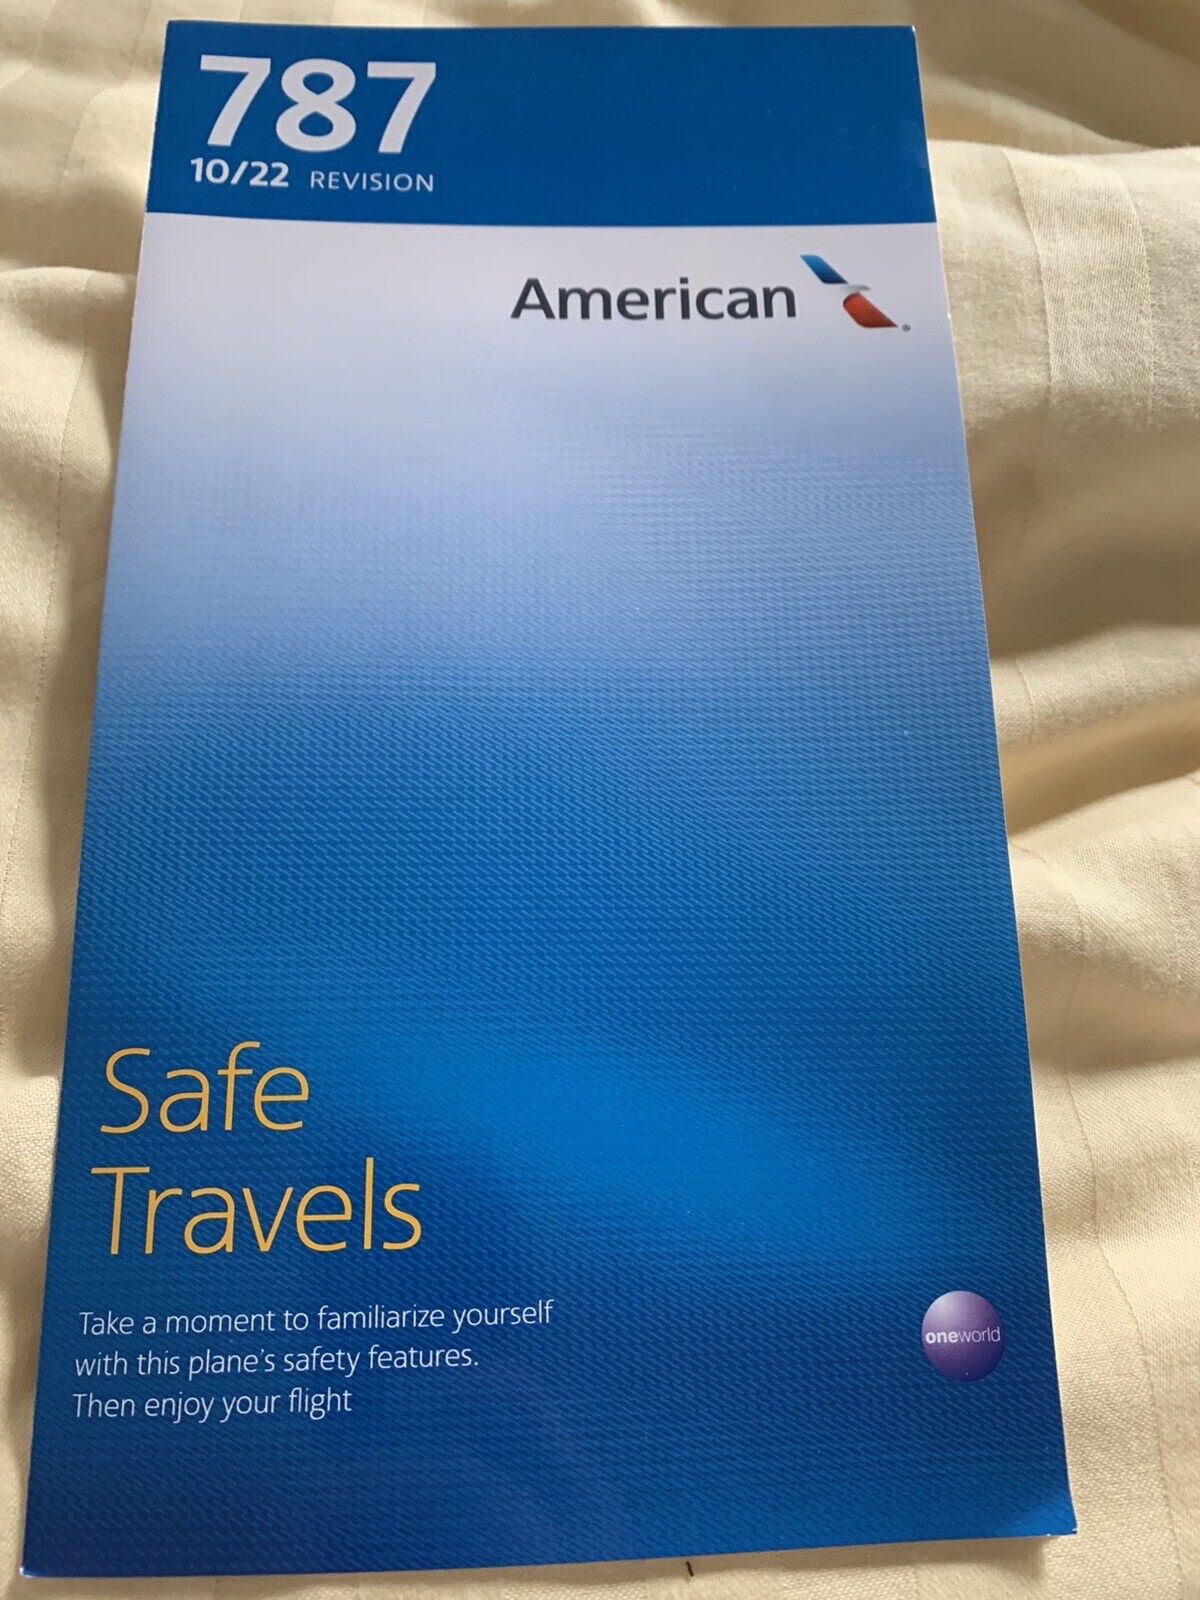 American Airlines DREAMLINER Boeing 787 Safety Card 10/22 Revision New Version